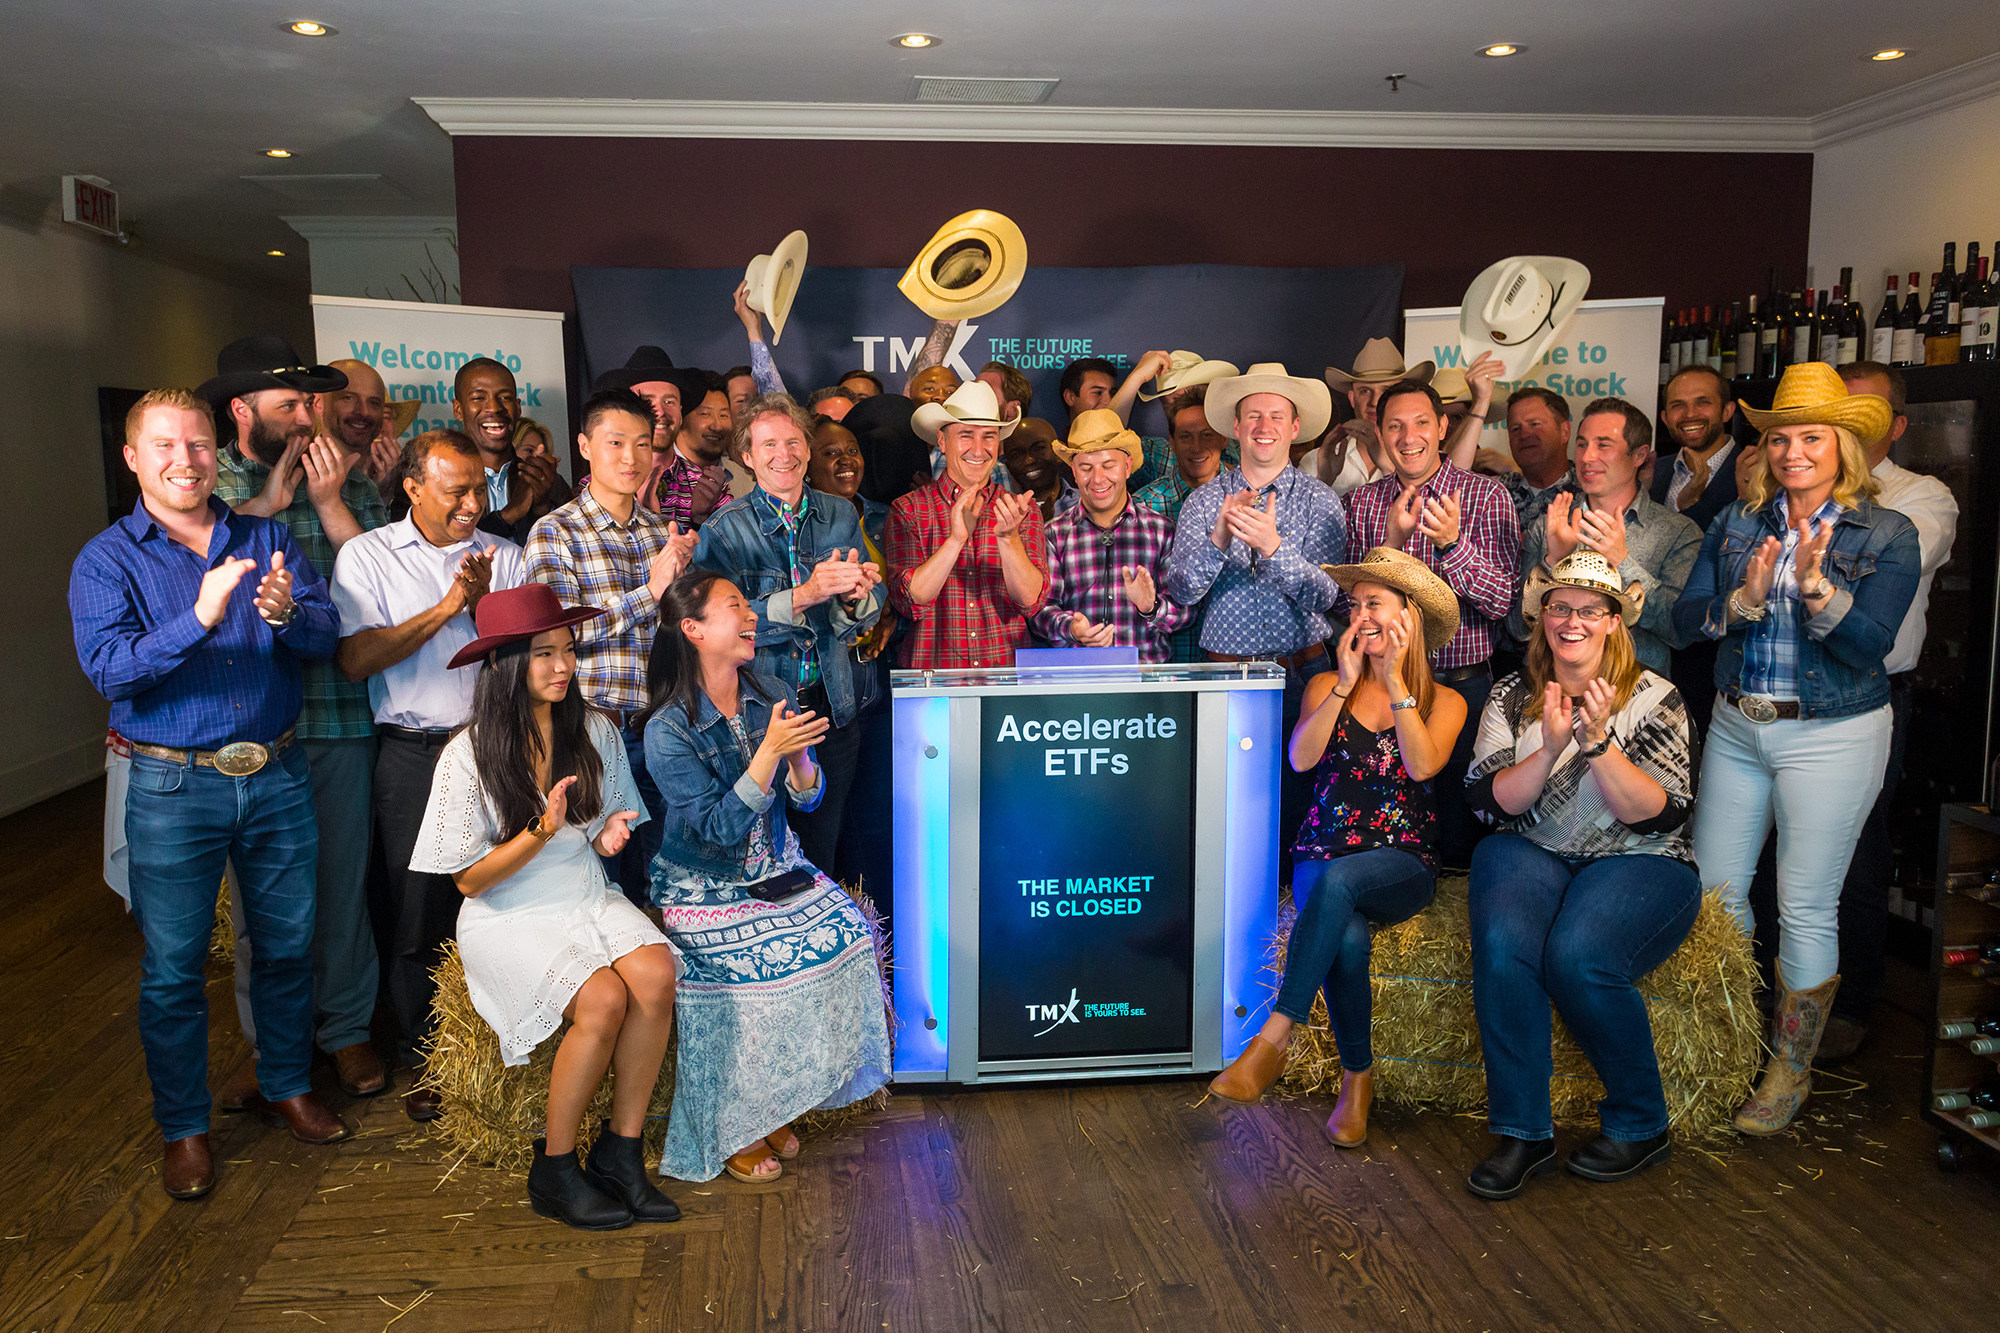 Yeehaw! Accelerate Closes the Market in Calgary